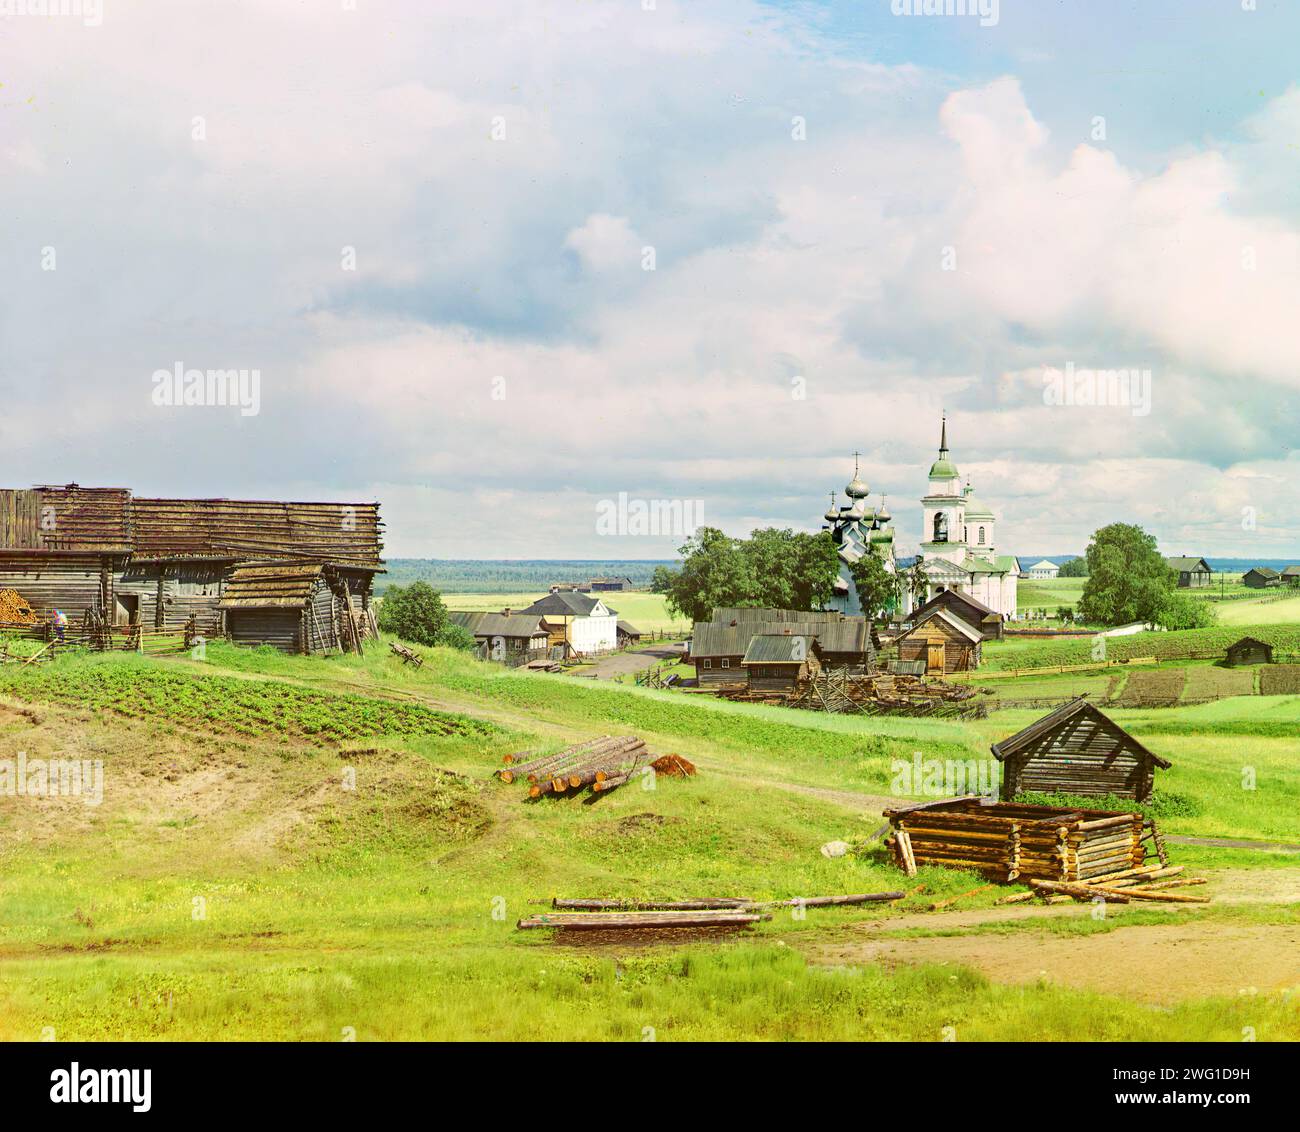 Village of Paltoga [Russian Empire], 1909. Log cabin under construction in foreground, Vologda Oblast, Russia. Russian chemist and photographer Sergey Prokudin-Gorsky (1863-1944) was a pioneer in colour photography which he used to document early 20th-century Russia and her empire, including the vanishing way of life of tribal peoples along the Silk Route in Central Asia. In a railway-carriage darkroom provided by Czar Nicholas II, Prokudin-Gorsky used the three-colour photography process to record traditional costumes and occupations, churches and mosques - many now Unesco World Heritage site Stock Photo